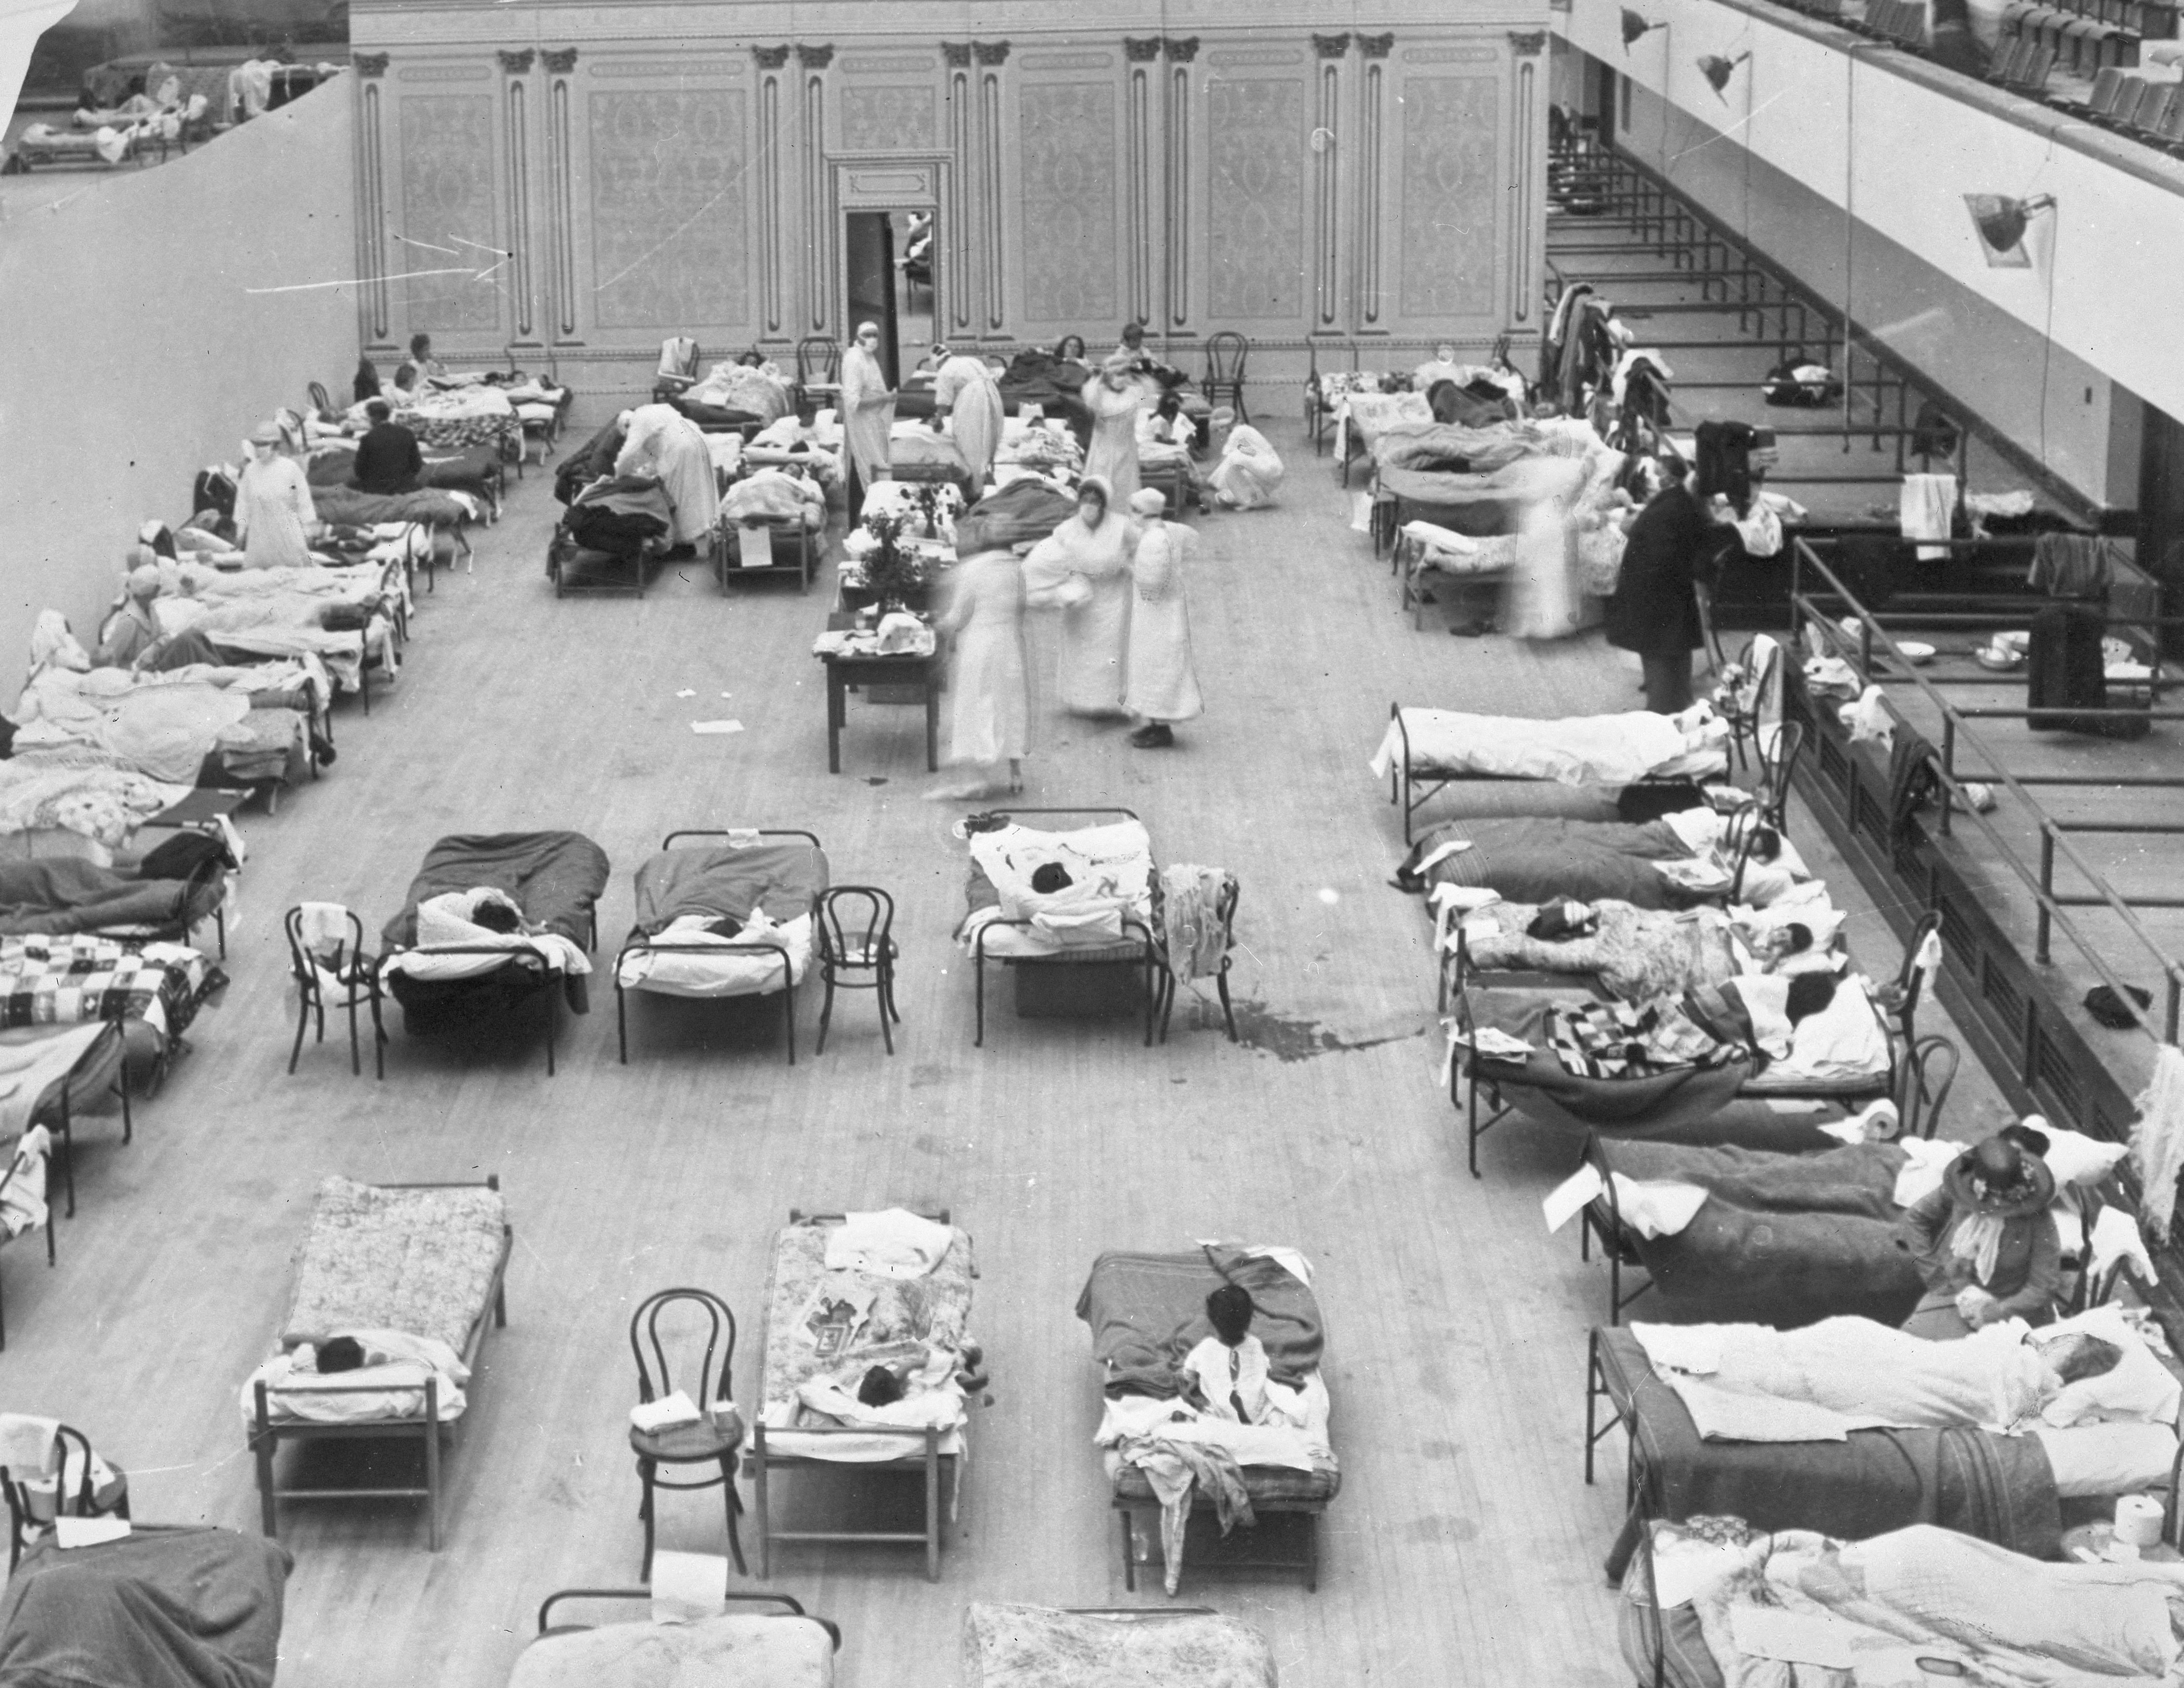 FILE - In this 1918 file photo made available by the Library of Congress, volunteer nurses from the American Red Cross tend to influenza patients in the Oakland Municipal Auditorium, used as a temporary hospital. Science has ticked off some major accomplishments over the last century. The world learned about viruses, cured various diseases, made effective vaccines, developed instant communications and created elaborate public-health networks. Yet in many ways, 2020 is looking like 1918, the year the great influenza pandemic raged. Photo: AP